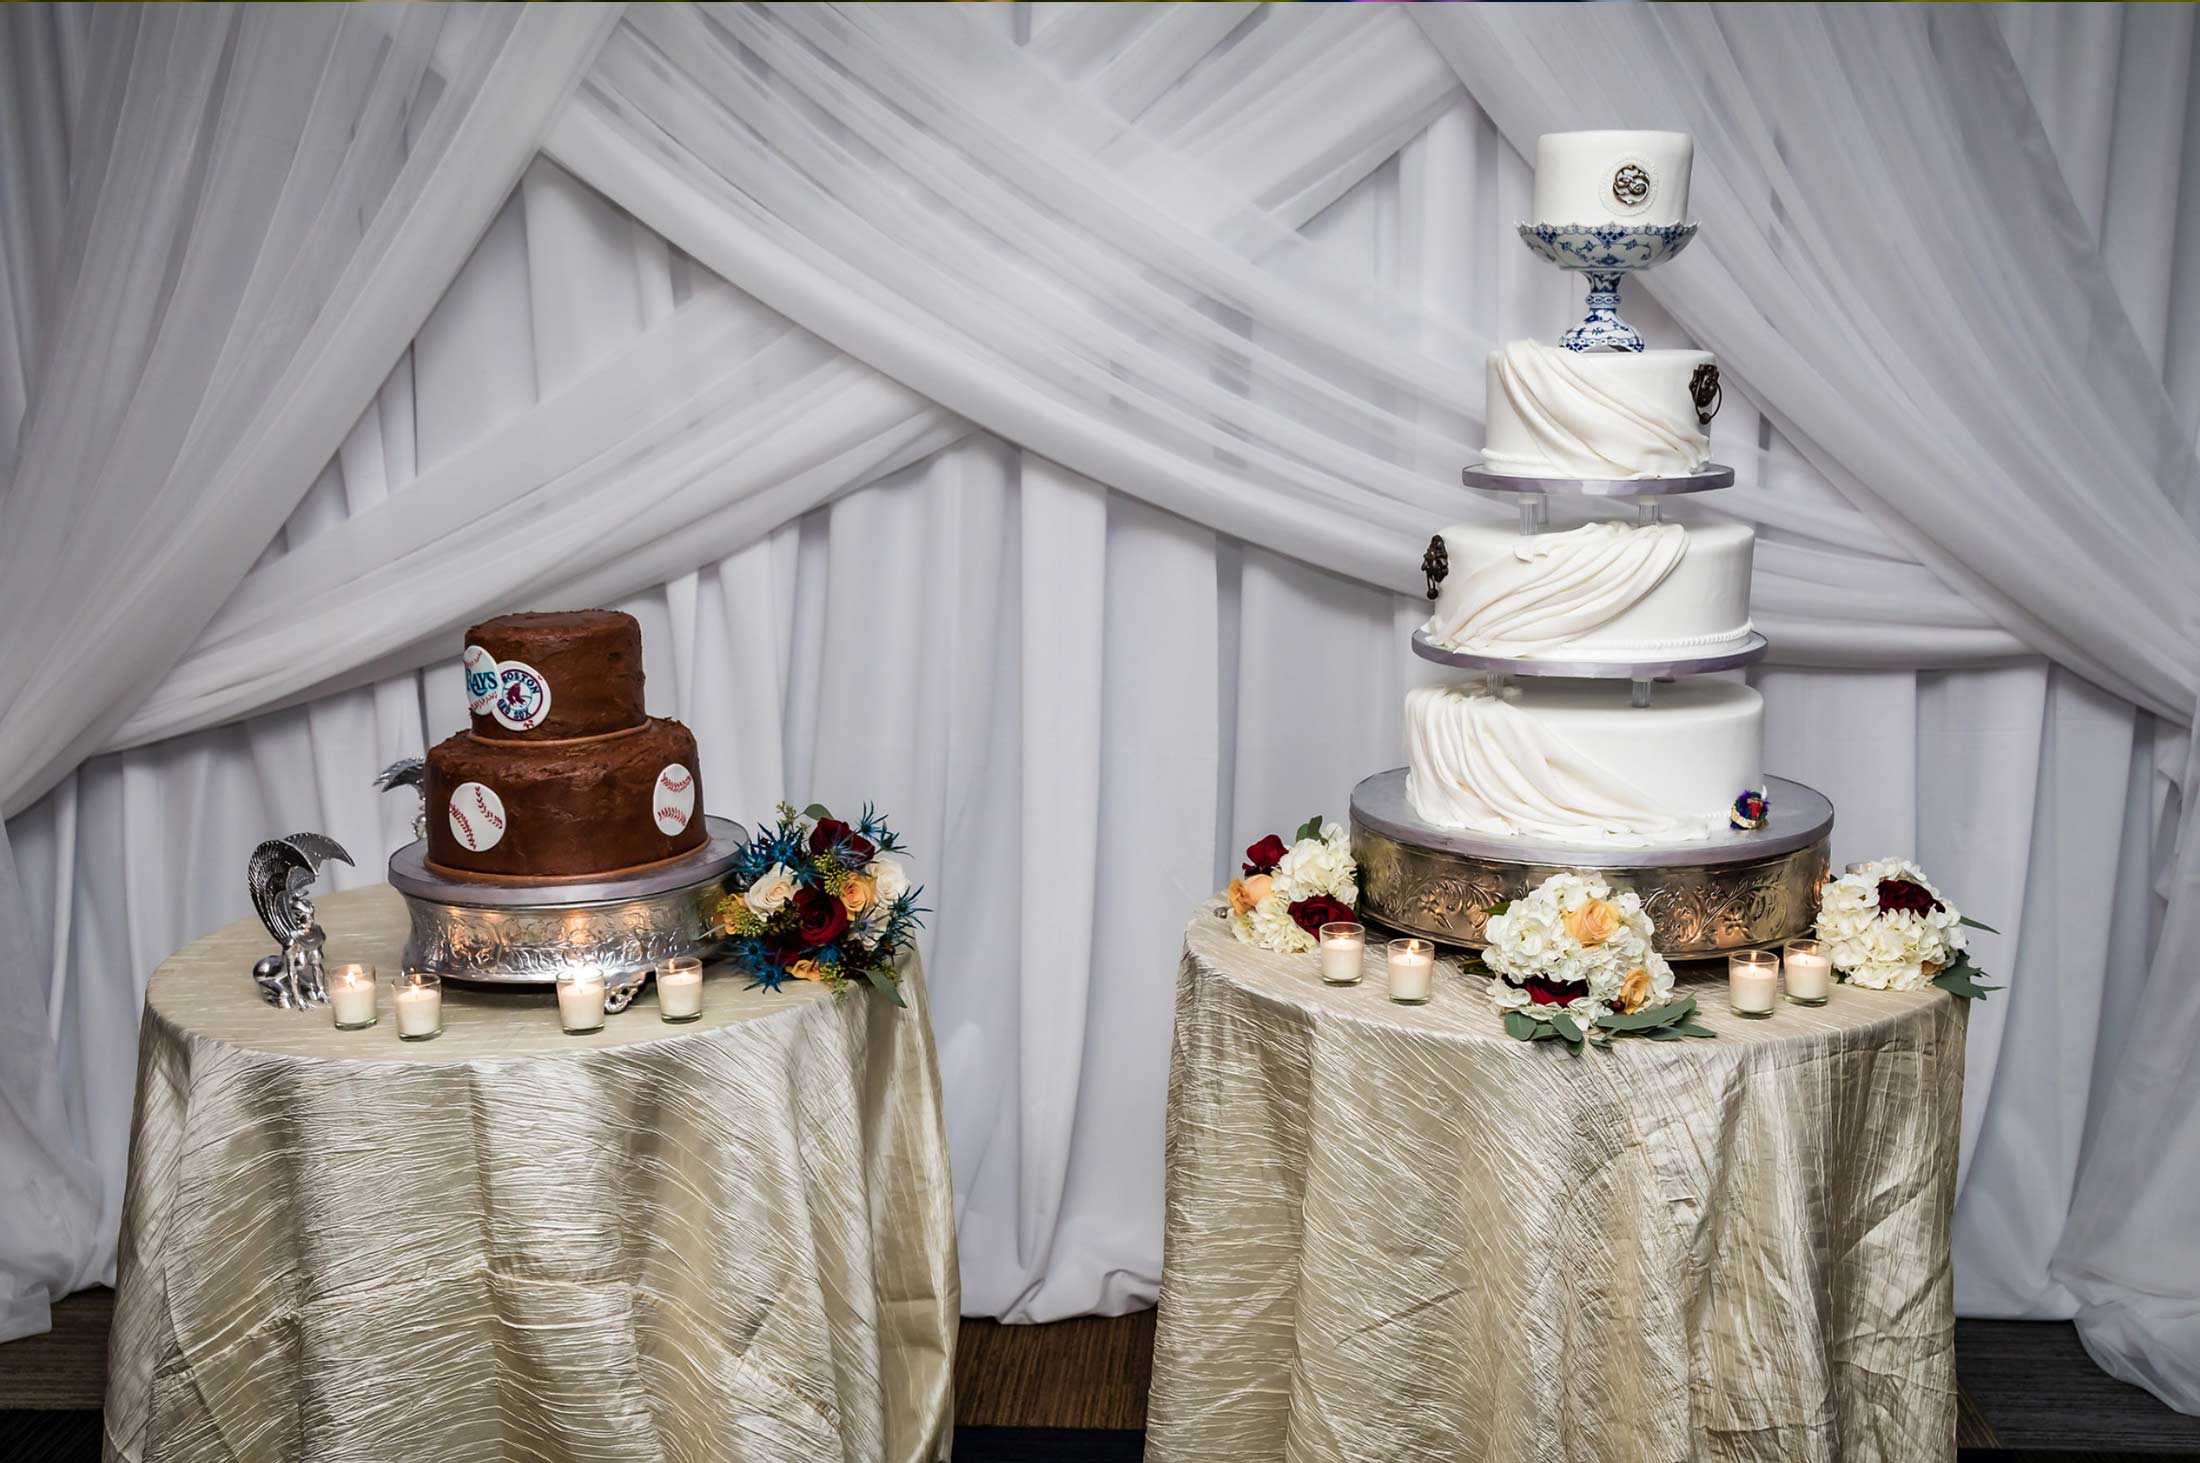 chocolate grooms cake on table and 4 tier wedding cake on table